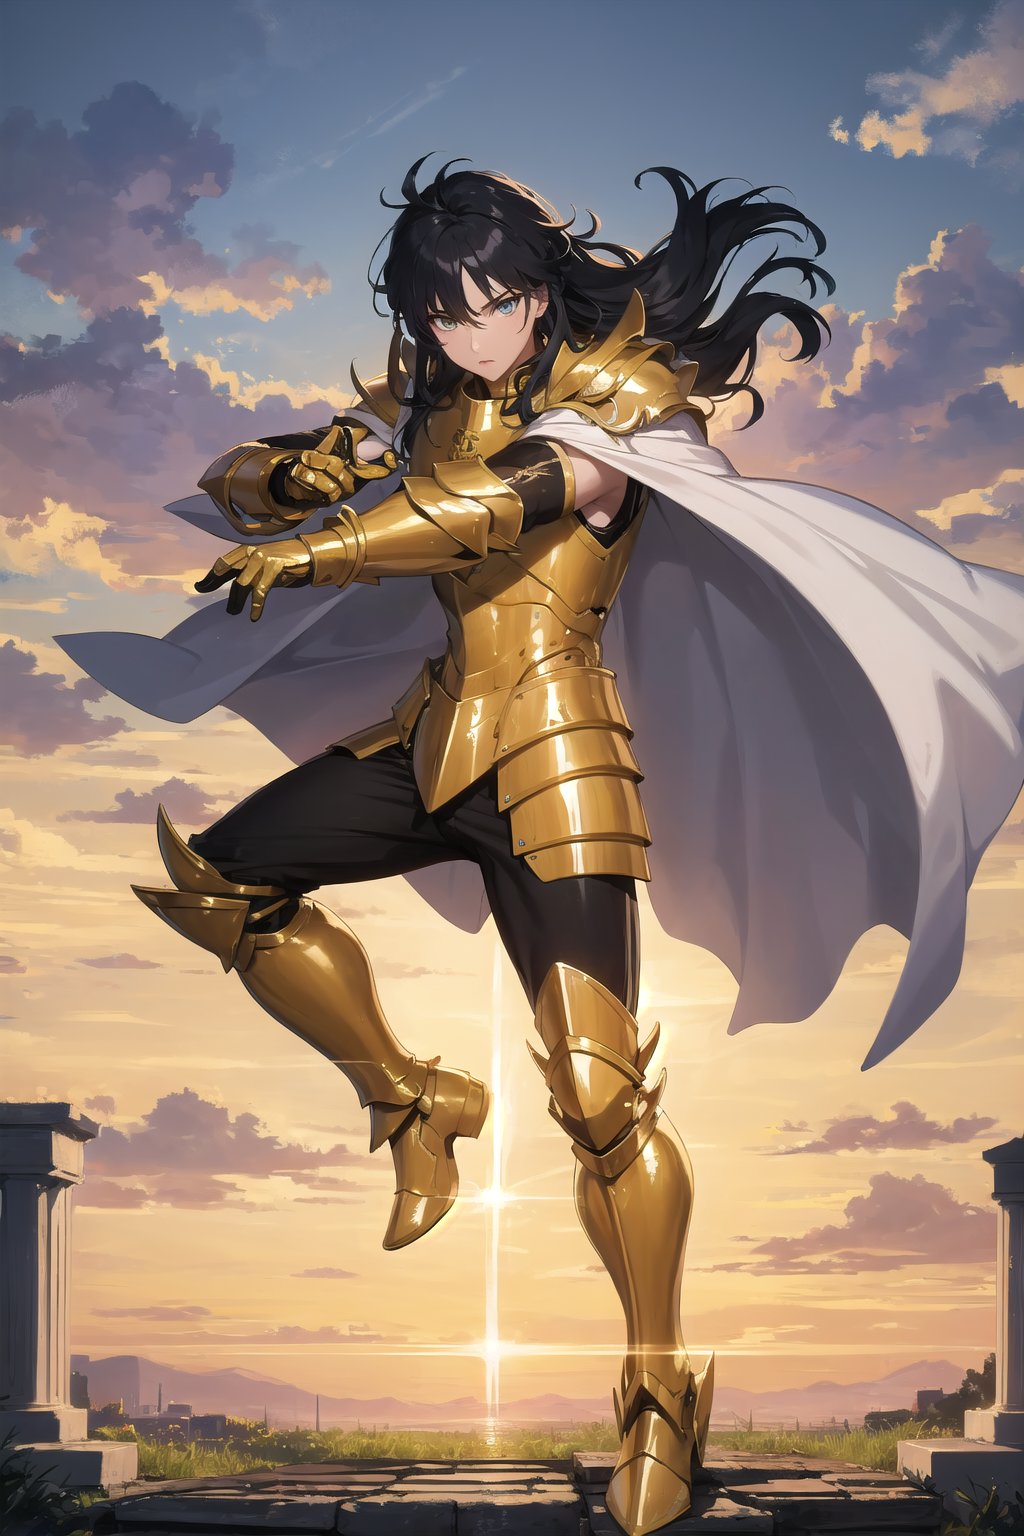 absurdres, highres, ultra detailed,Insane detail in face,  (boy:1.3), Gold Saint, Saint Seiya Style, Gold Armor, Full body armor, no helmet, Zodiac Knights, White long cape, black hair,  fighting pose,Pokemon Gotcha Style, gold gloves, long hair, white cape, messy_hair,  Gold eyes, black pants under armor, full body armor, beautiful old greek temple in the background, beautiful fields, full leg armor,